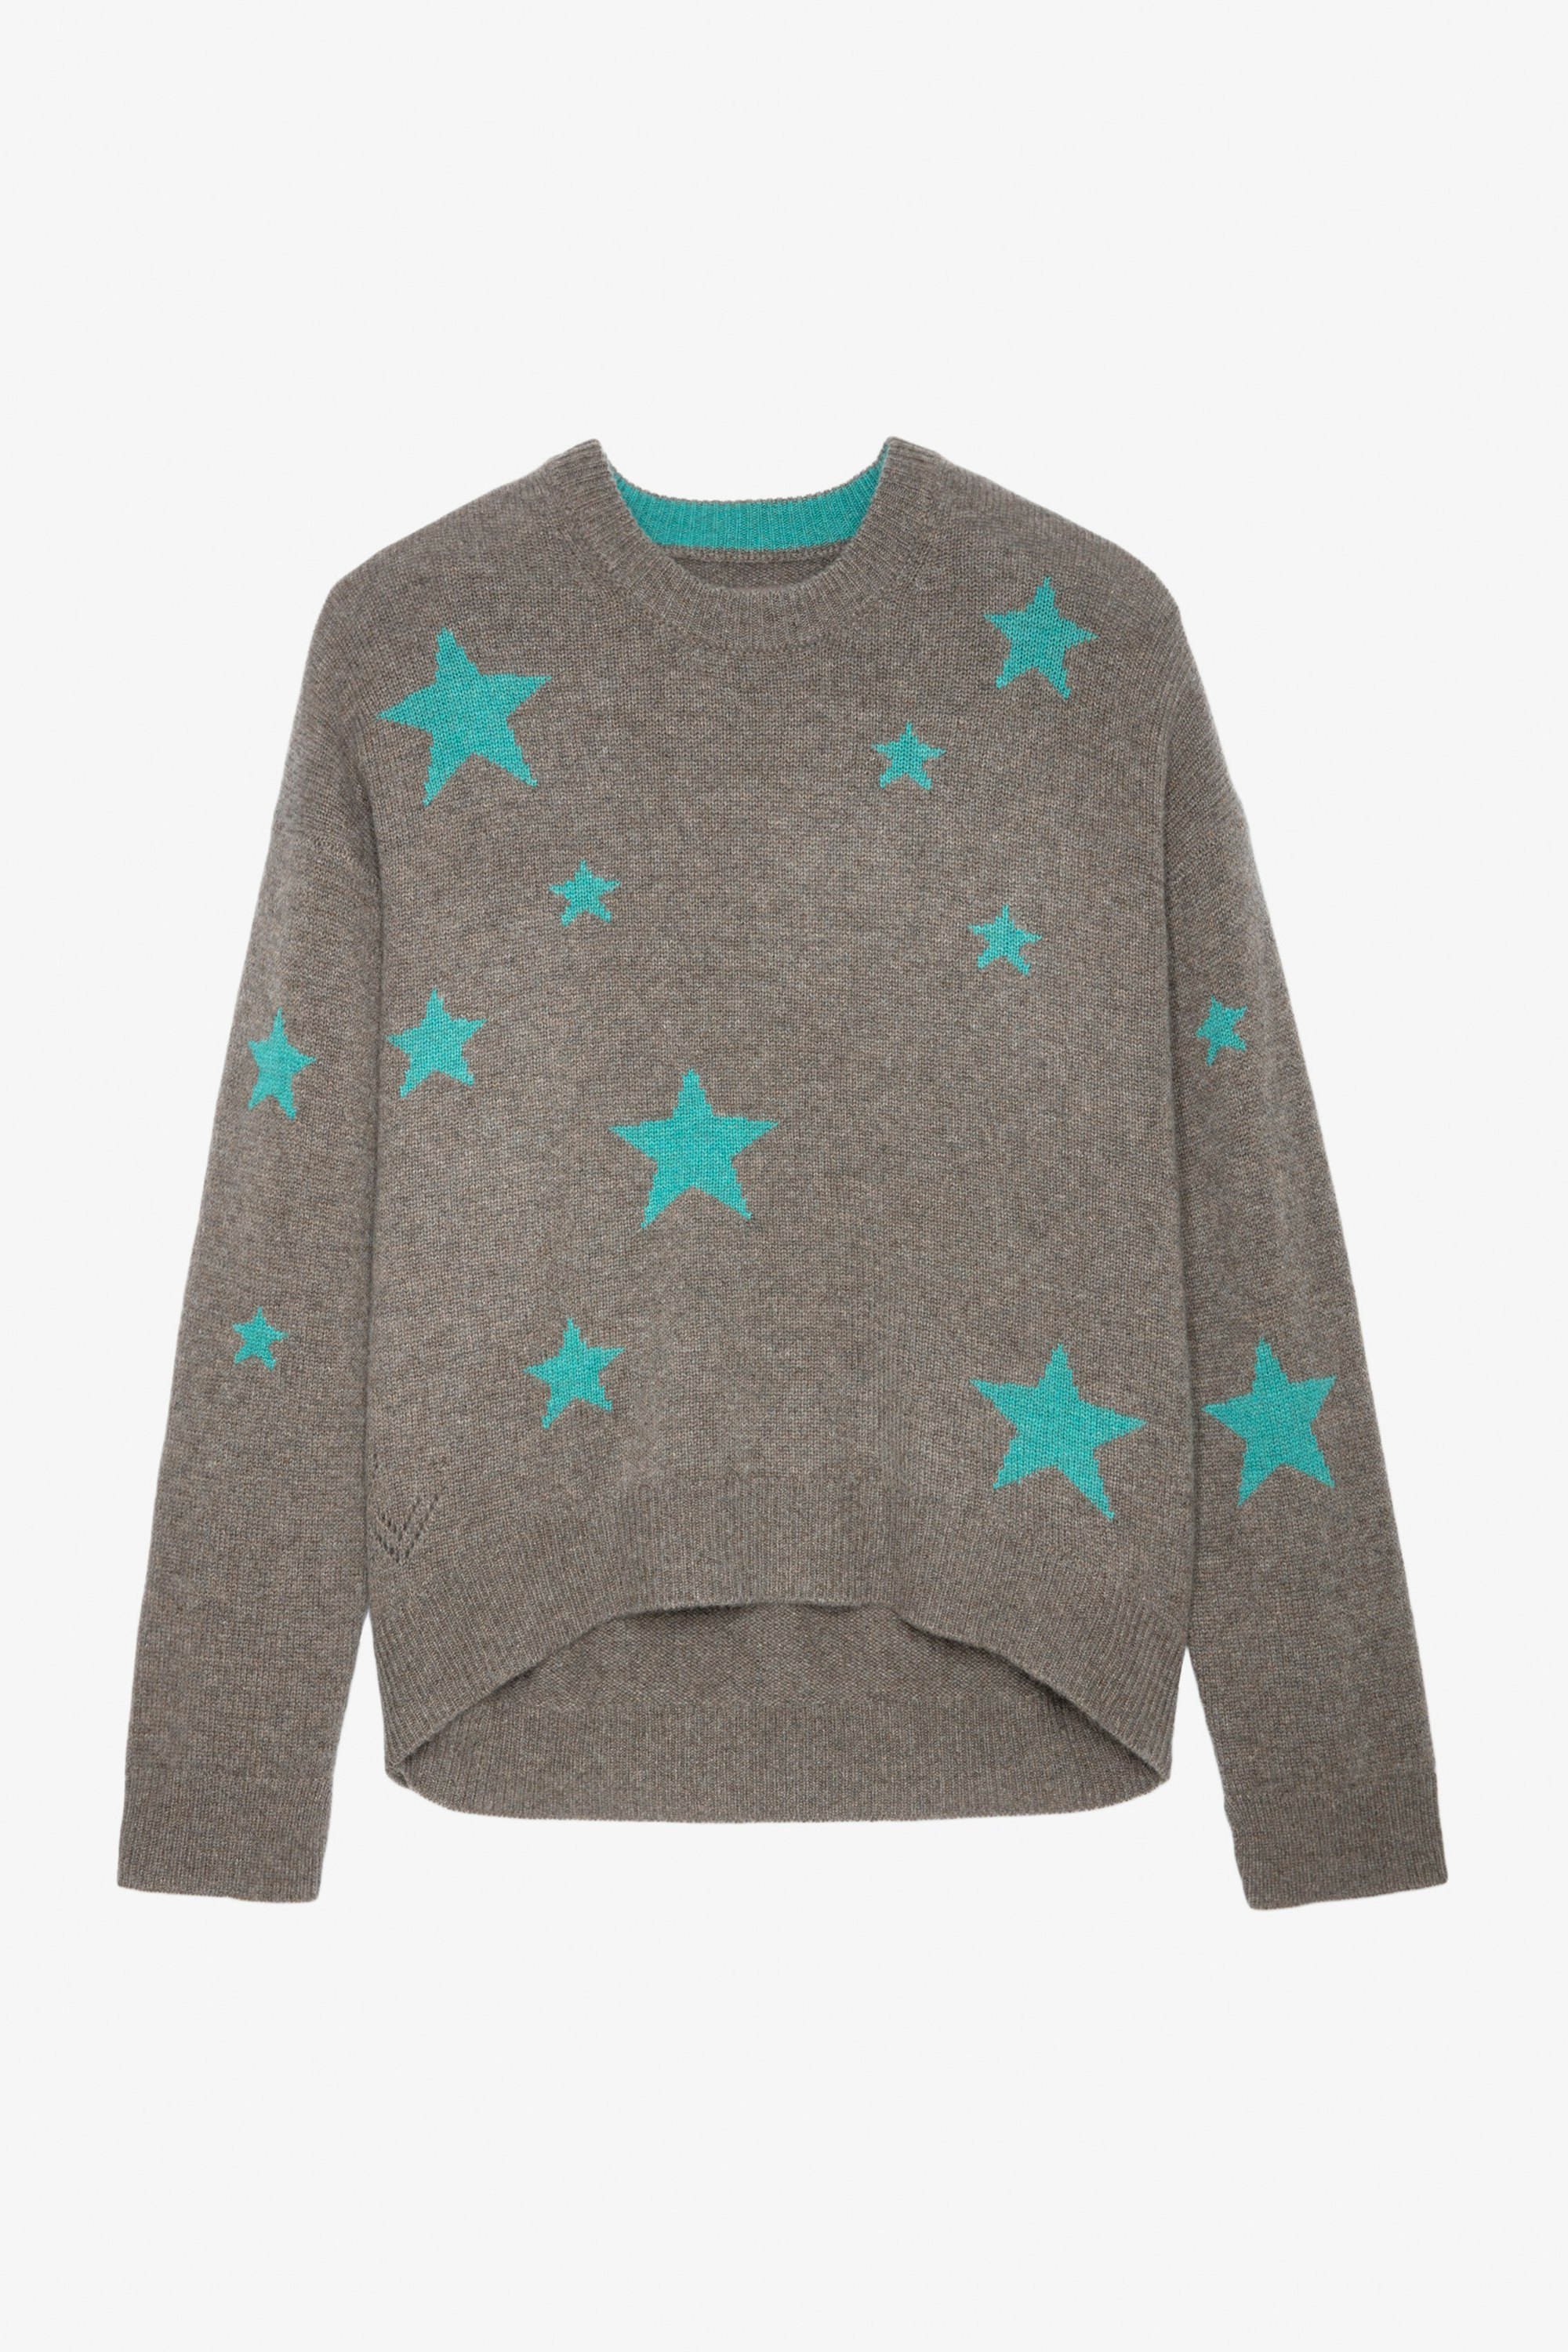 Markus Stars Cashmere Sweater - Women’s brown cashmere sweater with star-shaped motifs.